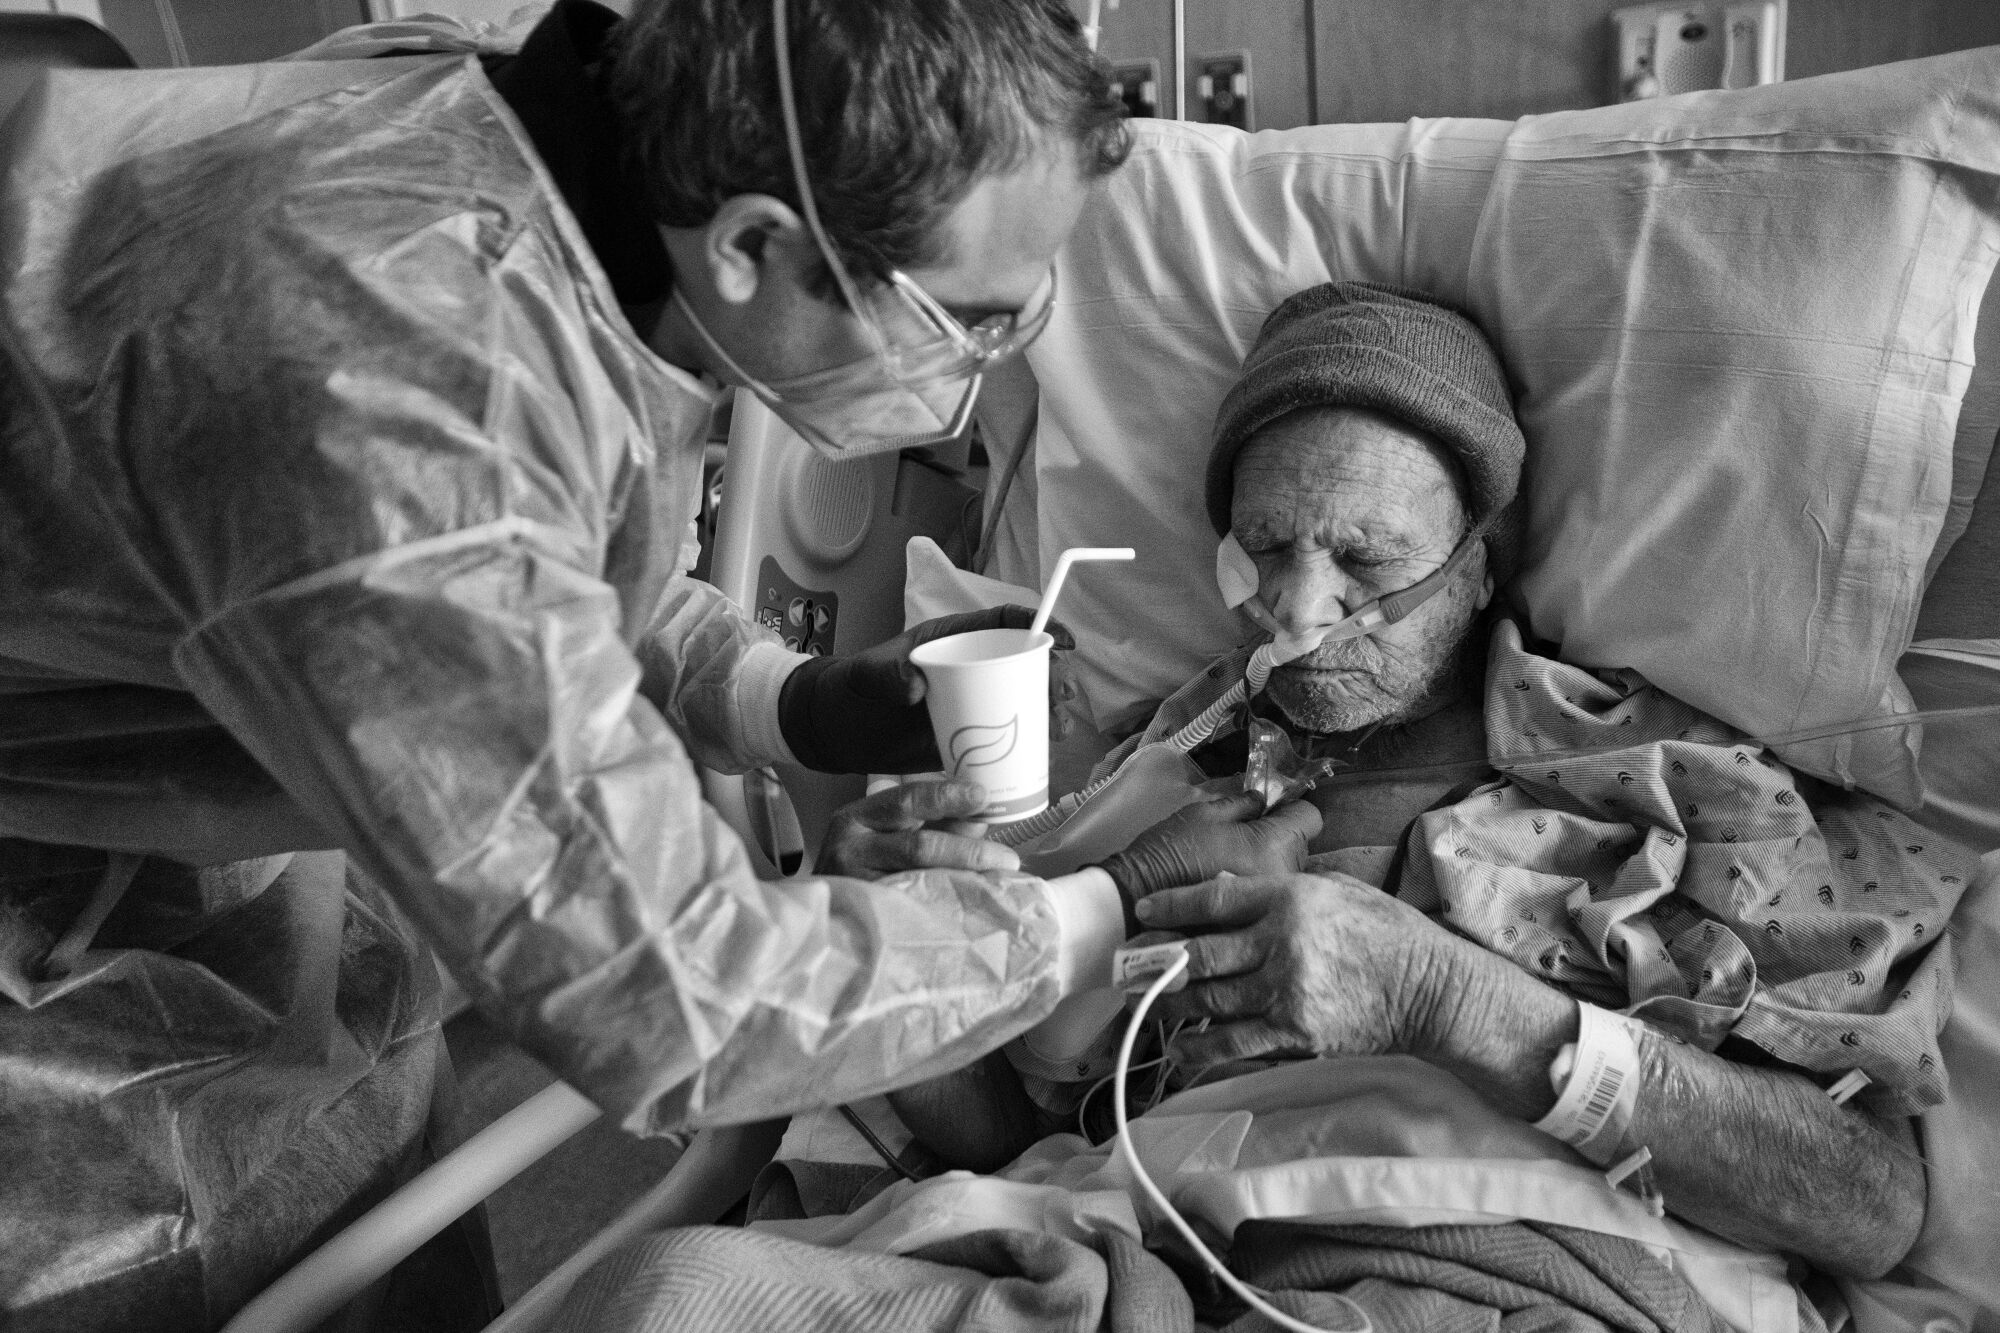 Chaplain Kevin helps a patient sip water in his hospital bed